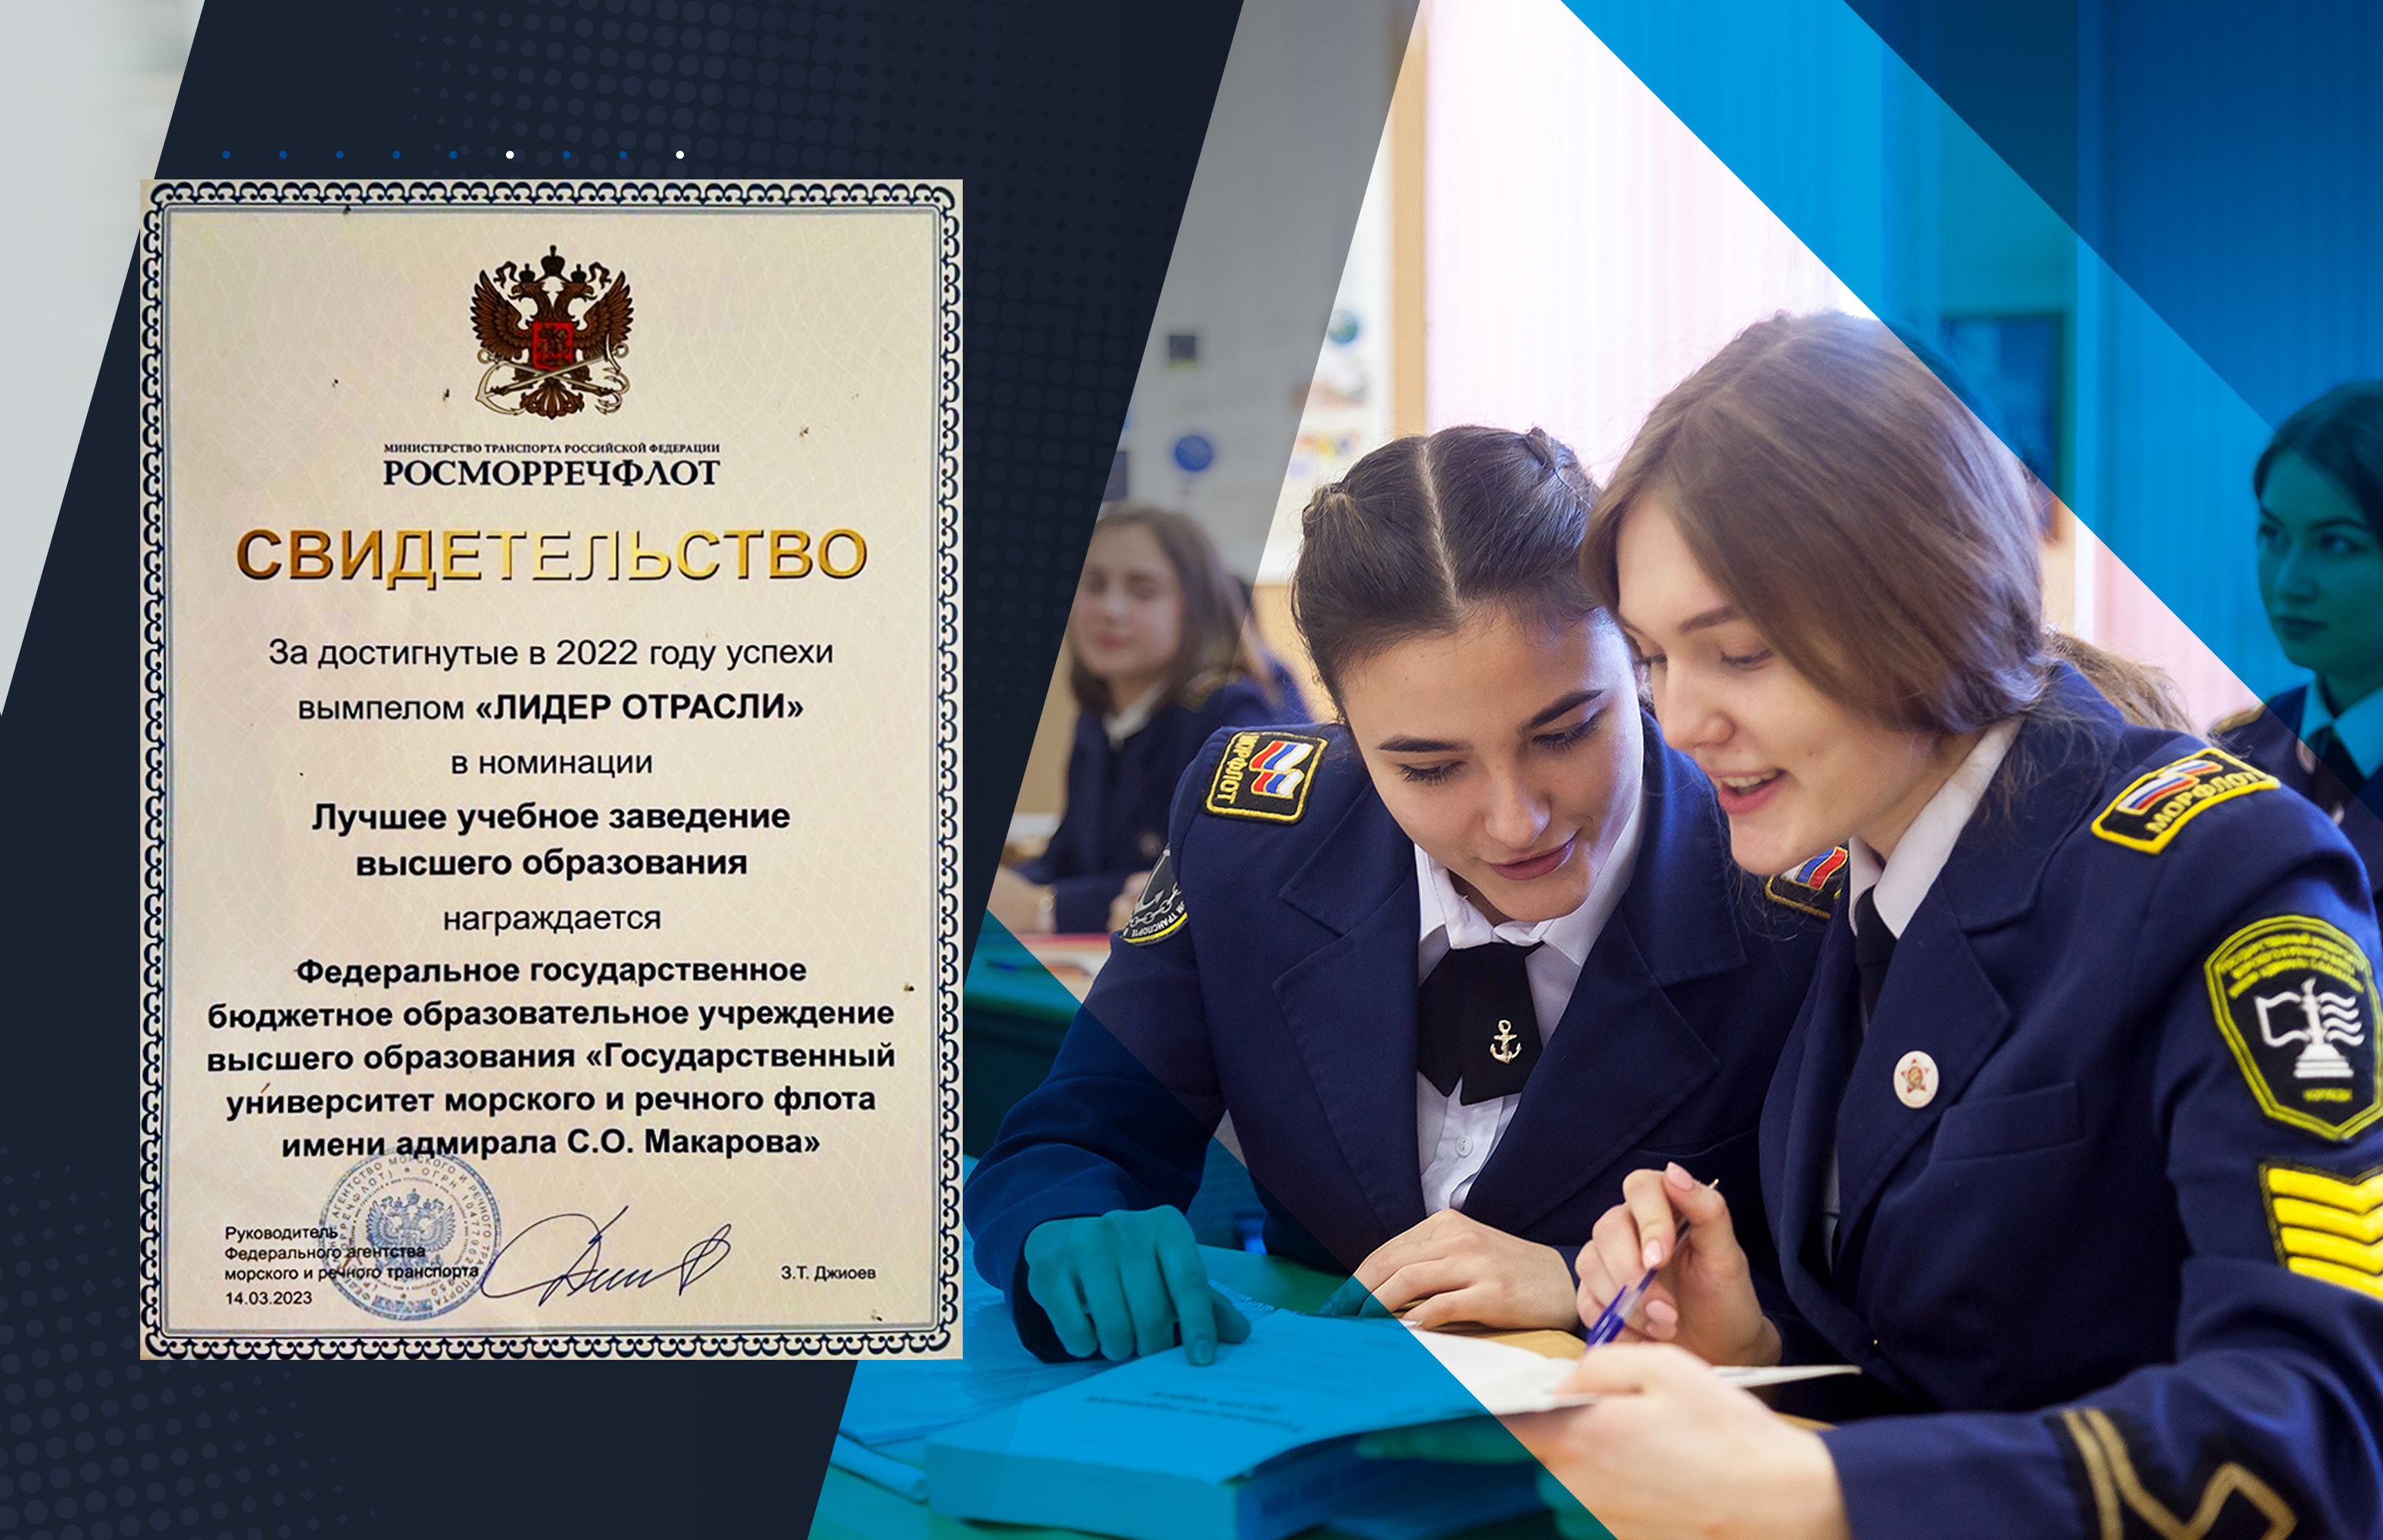 We are pleased to announce another bright victory. Admiral Makarov State University of Maritime and Inland Shipping became the winner of the high-status award "Industry Leader" in the nomination "Best Higher Education Institution" presented by the Federal Agency for Maritime and River Transportation of the Russian Federation. The RACUS organization congratulates the University management and the entire teaching staff on this high achievement and award. The university grows stronger thanks to your devotion and hard work, attracting the most aspiring candidates and renowned teachers. Dear colleagues, we wish you to continue reaching new heights and to bring glory to the power and valor of the Russian navy.